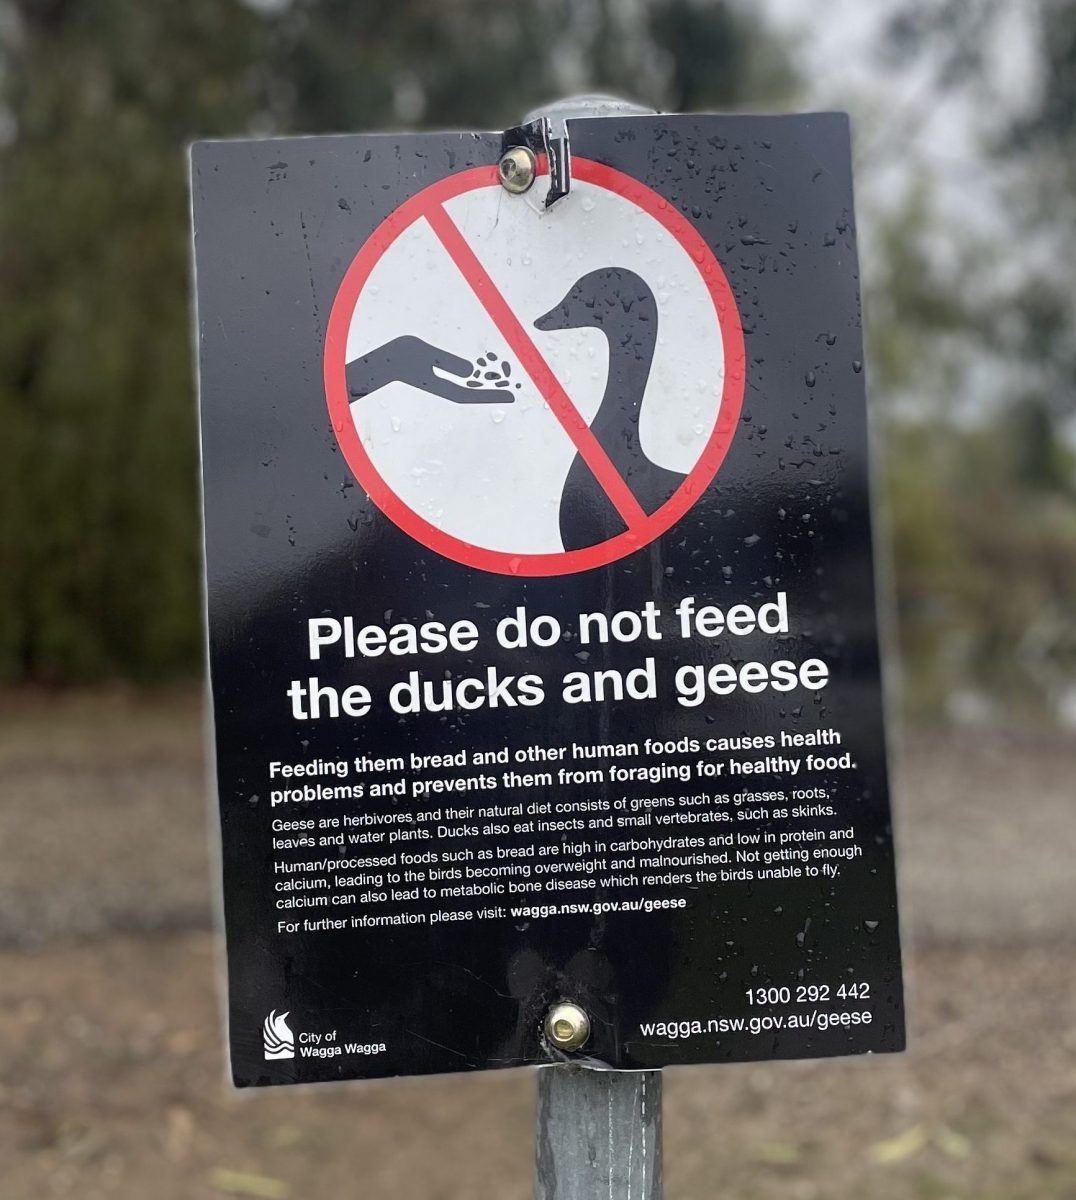 Sign advising not to feed the geese